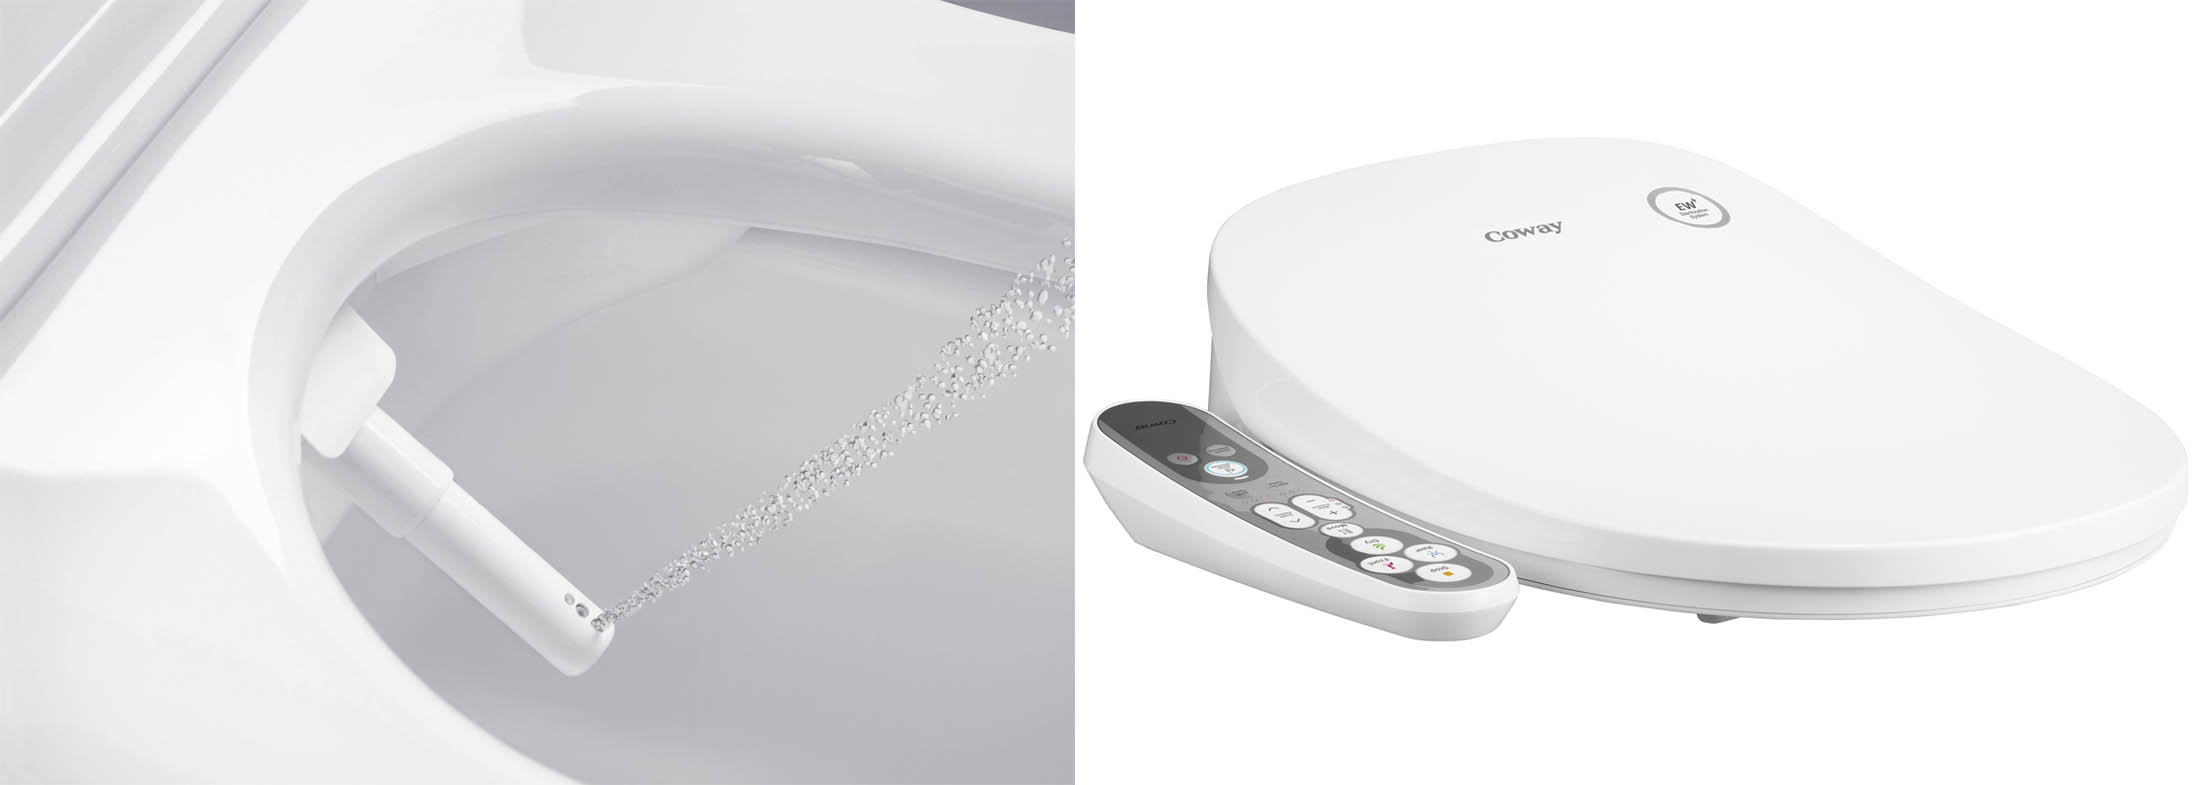 Washlet electronic bidet toilet seats can be installed on any existing toilet.